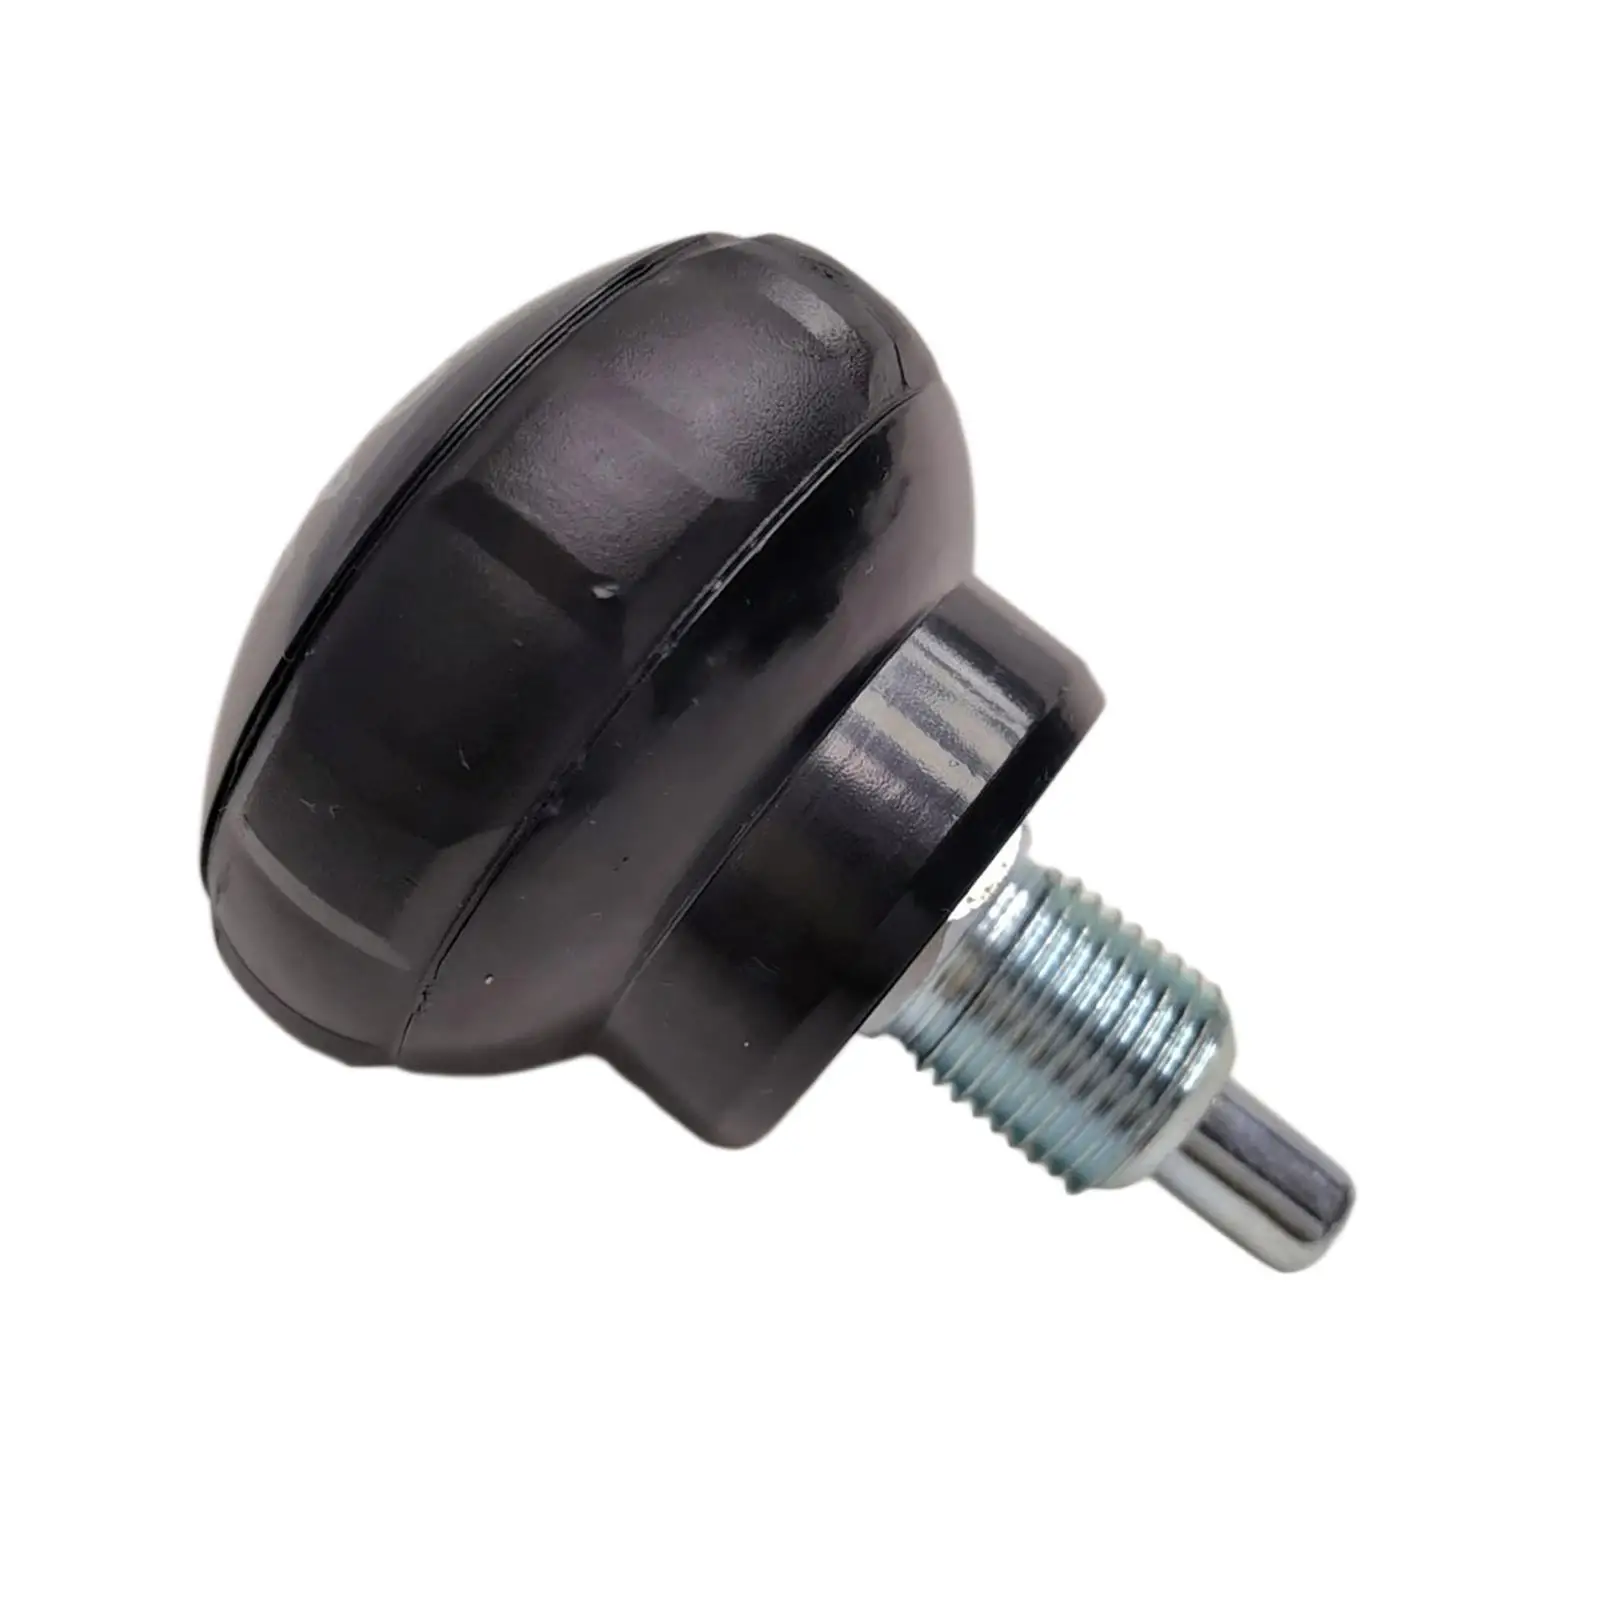 Pull Pin Spring Knob Equipment Replacement Heavy Duty Maintenance Fitment Pull up Knob